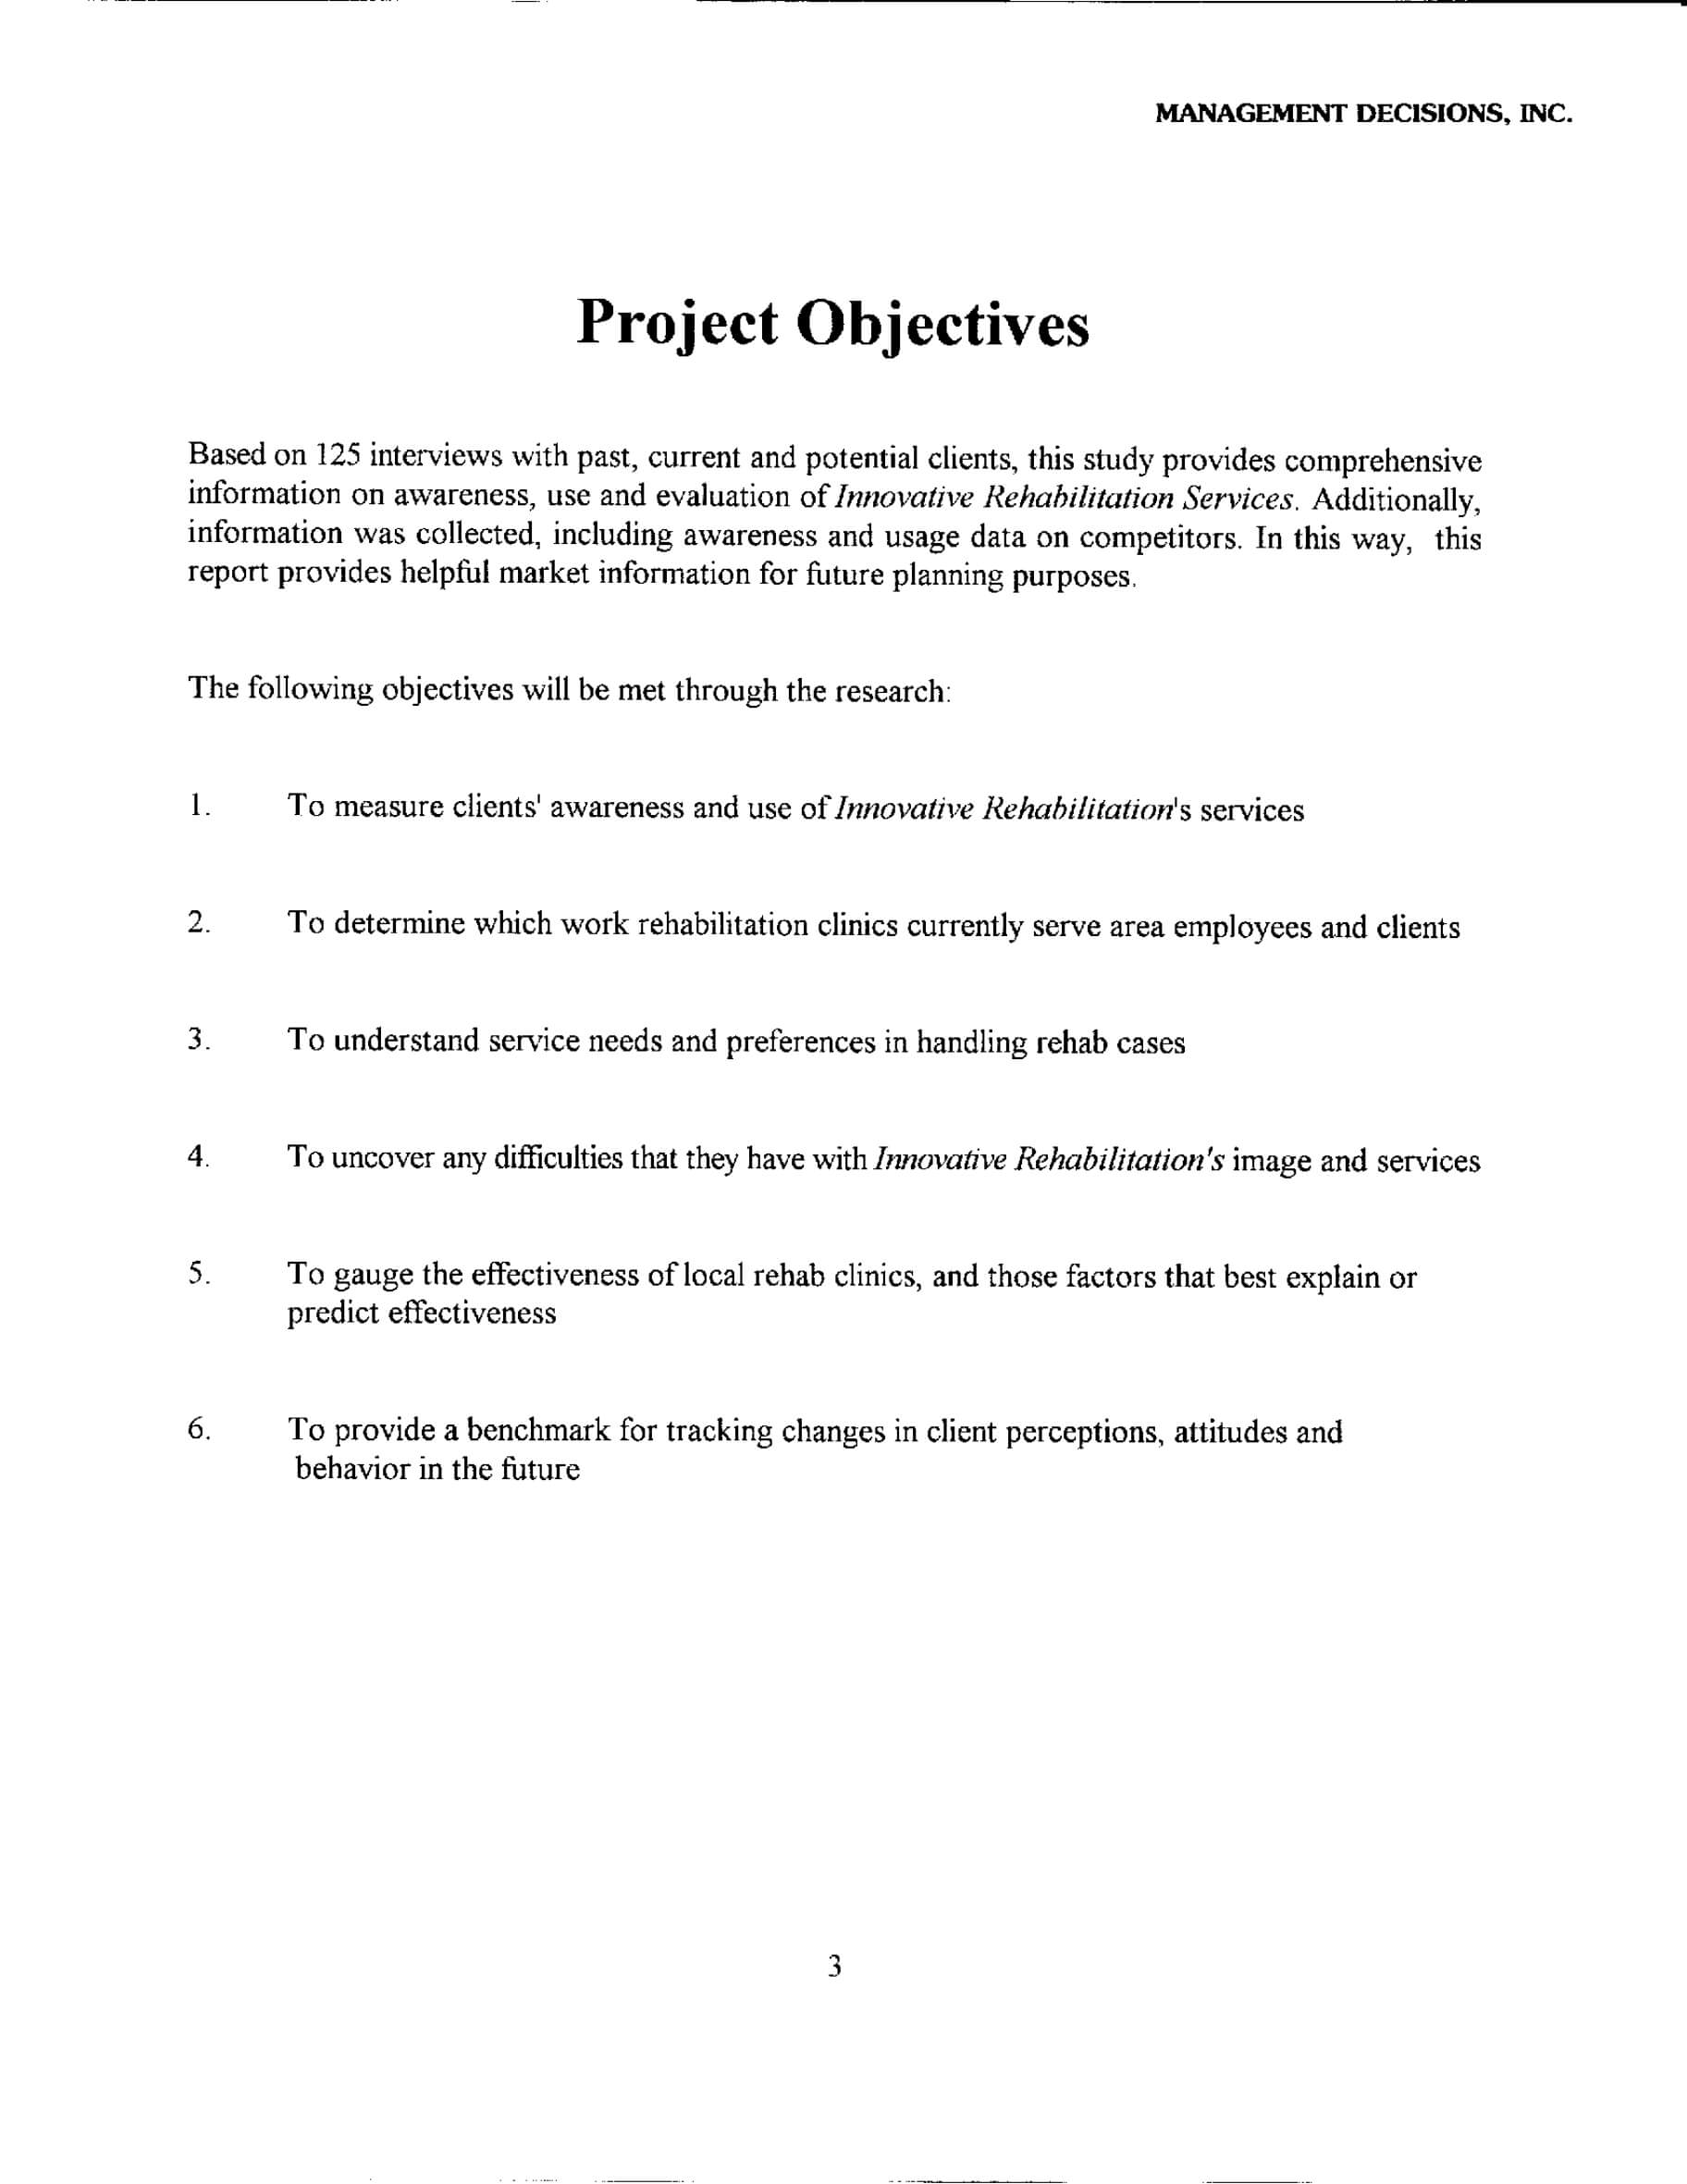 Market Analysis Report (Example Research) – Management With Project Analysis Report Template